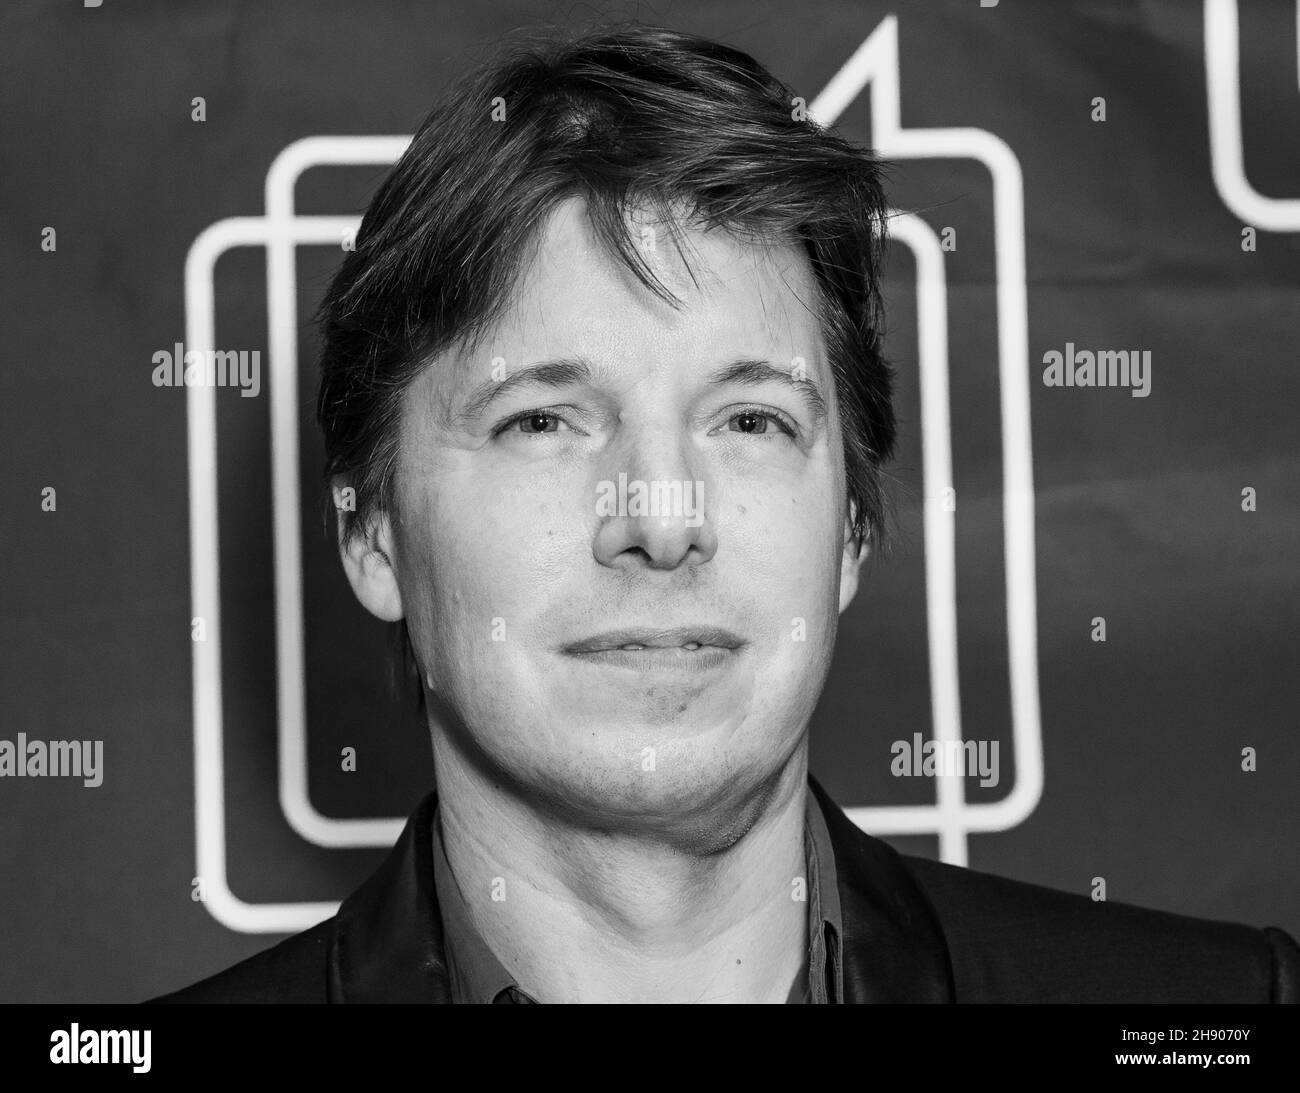 New York, NY - December 2, 2021: Joshua Bell attends Bring Change to Mind Gala at City Winery Stock Photo